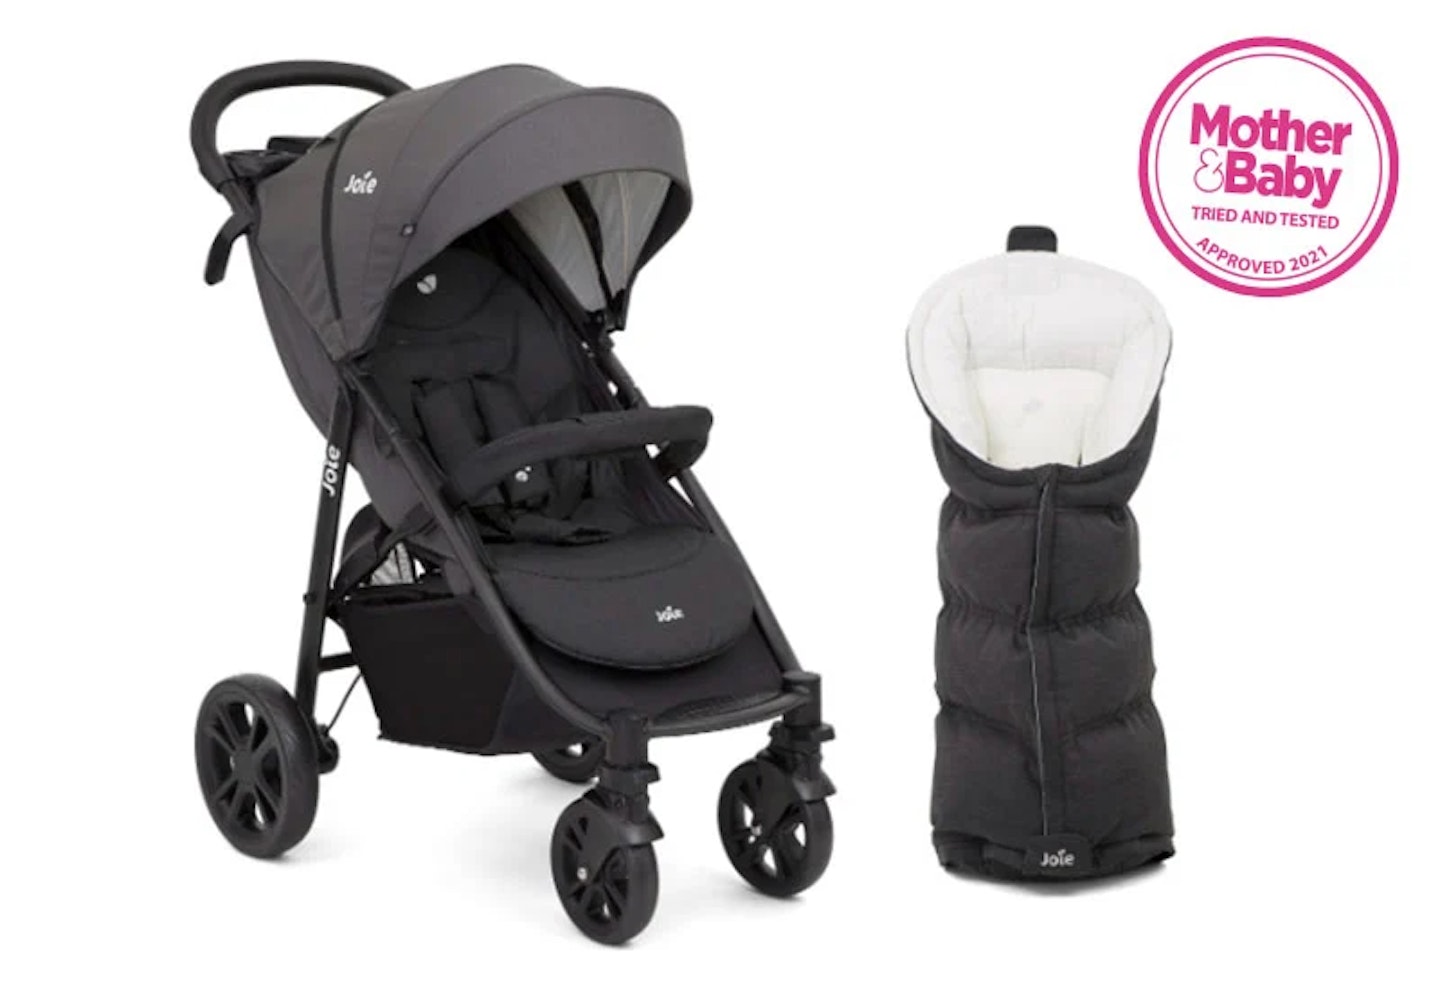 Joie litetrax 4™ and therma™ footmuff